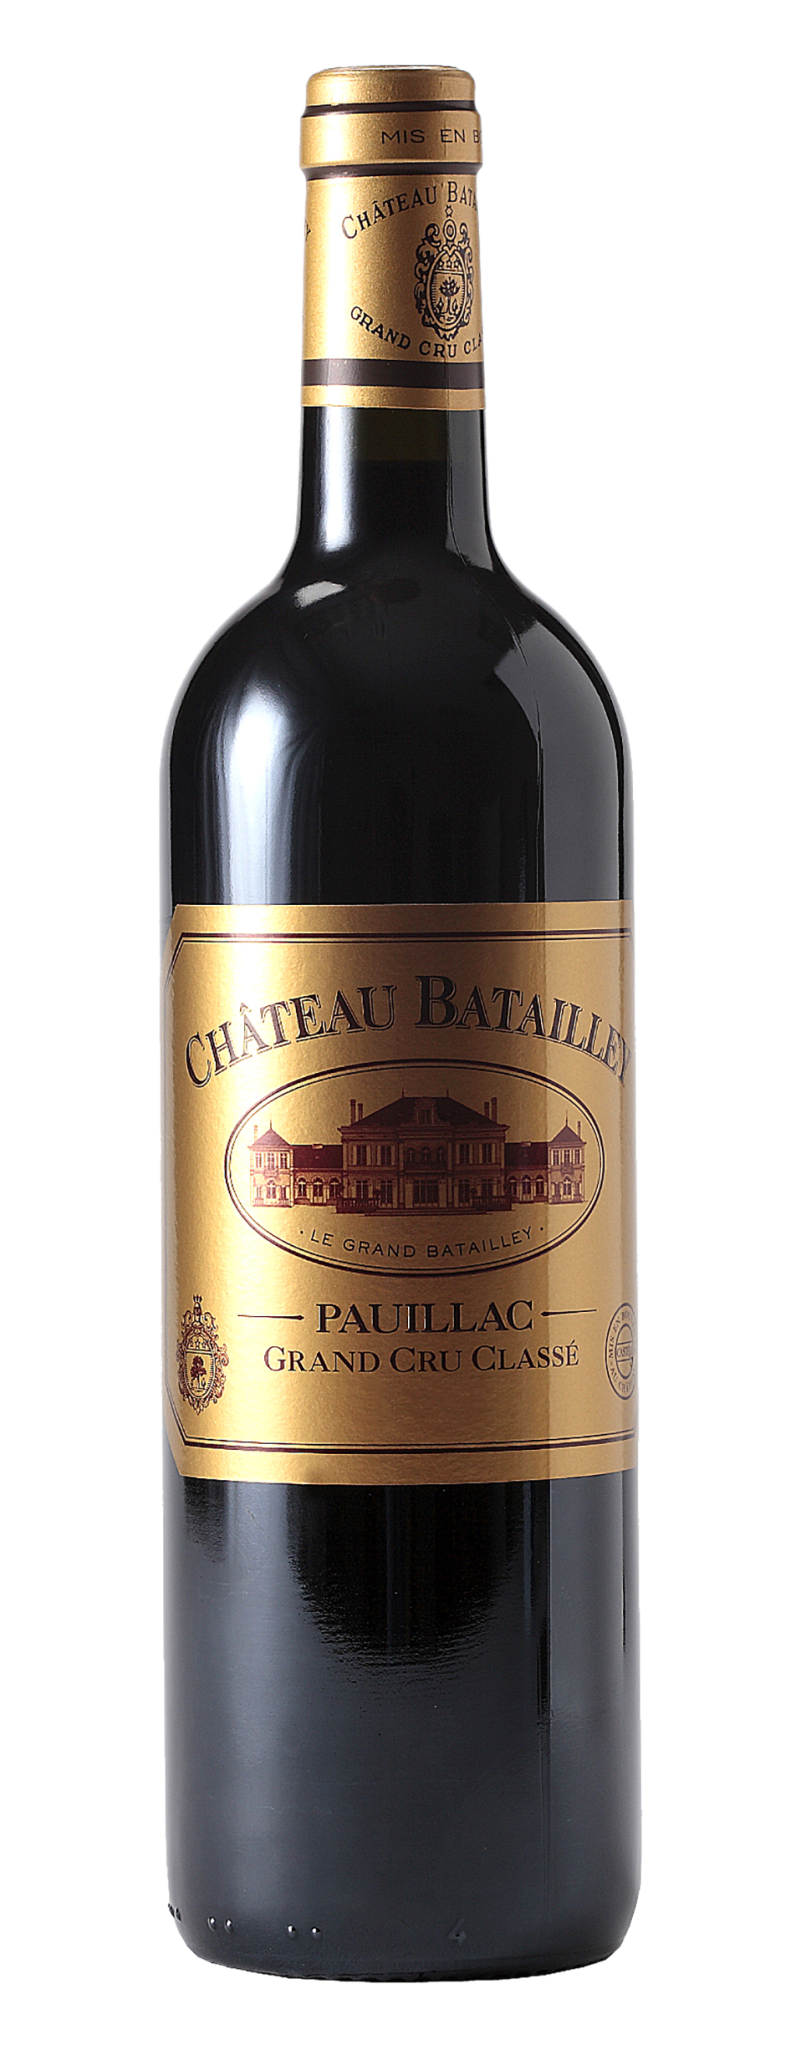 Chateau Batailley 2014  - 750ml